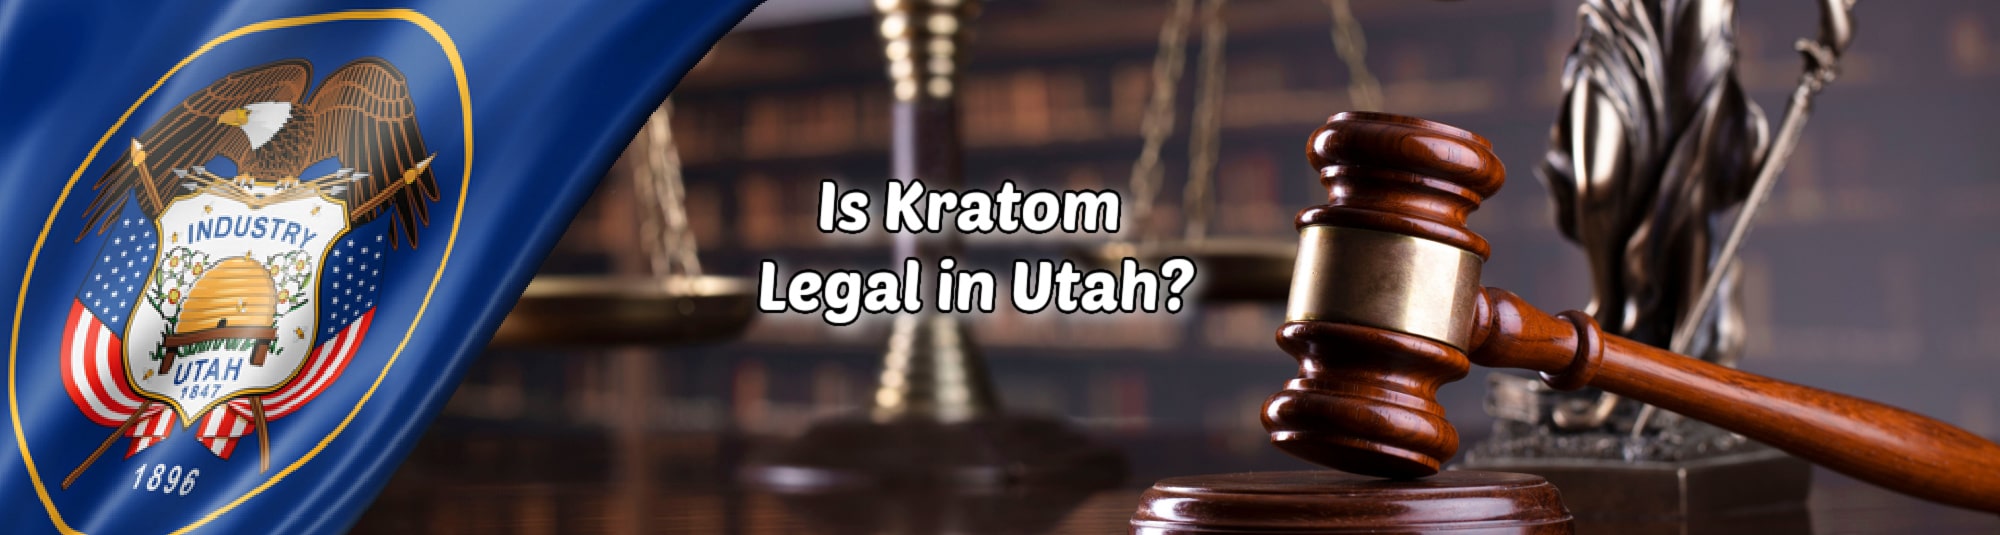 Is Kratom Legal in Utah: The Facts and Details